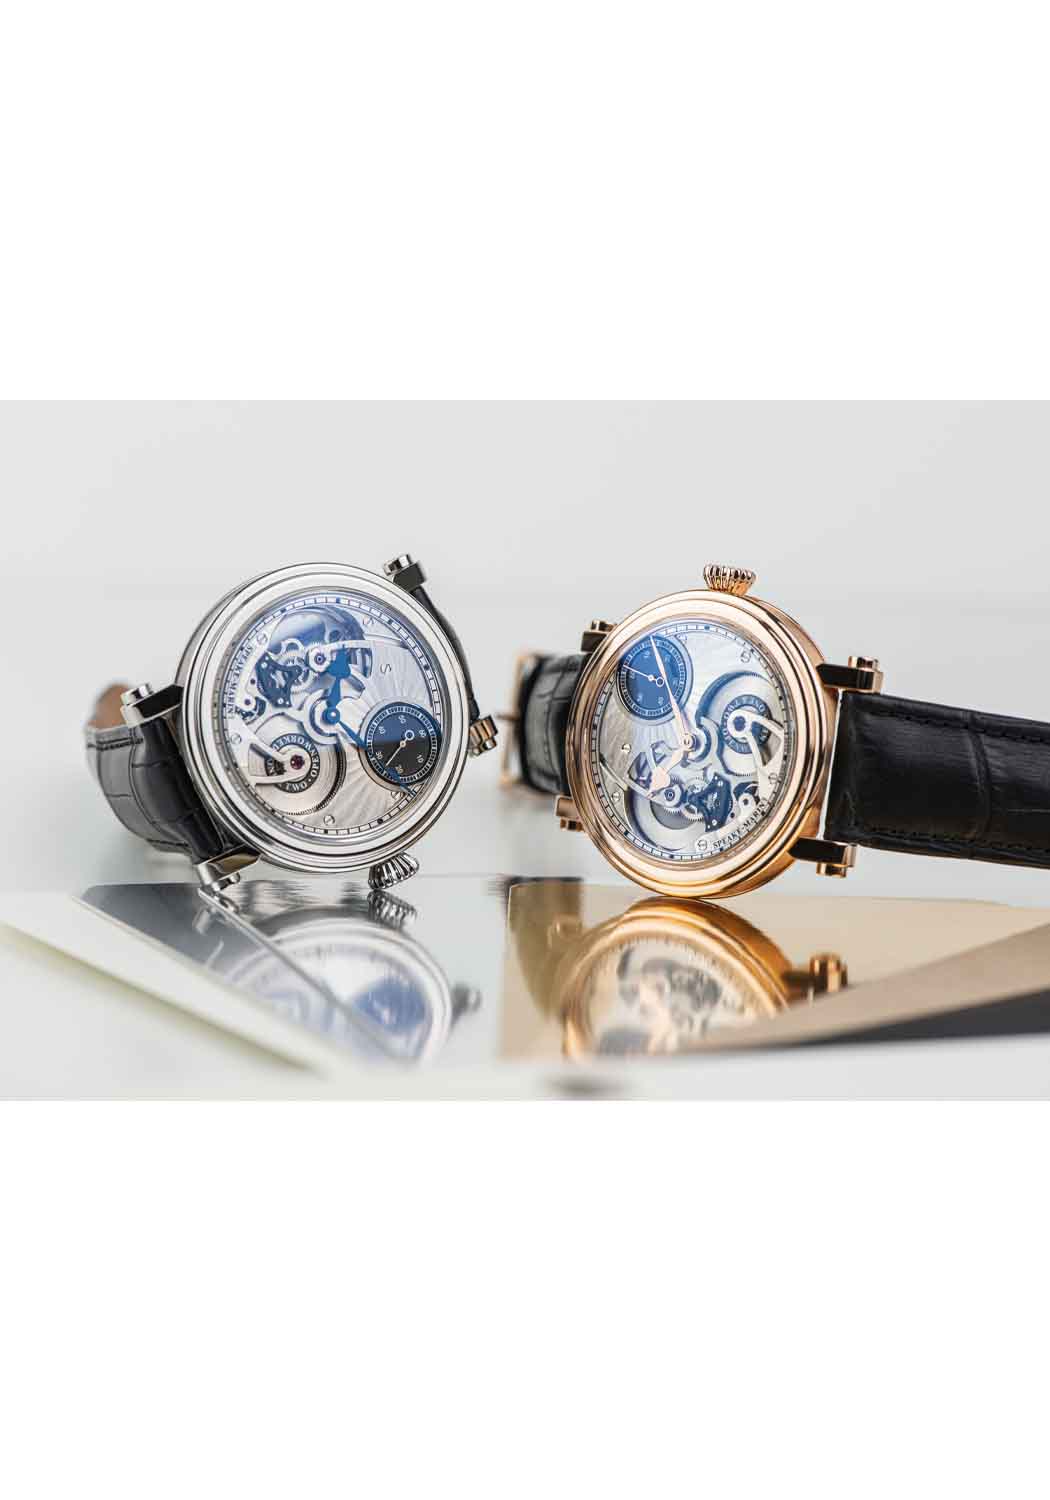 Speake-Marin One & Two Openworked HMS 18KRG | LE20